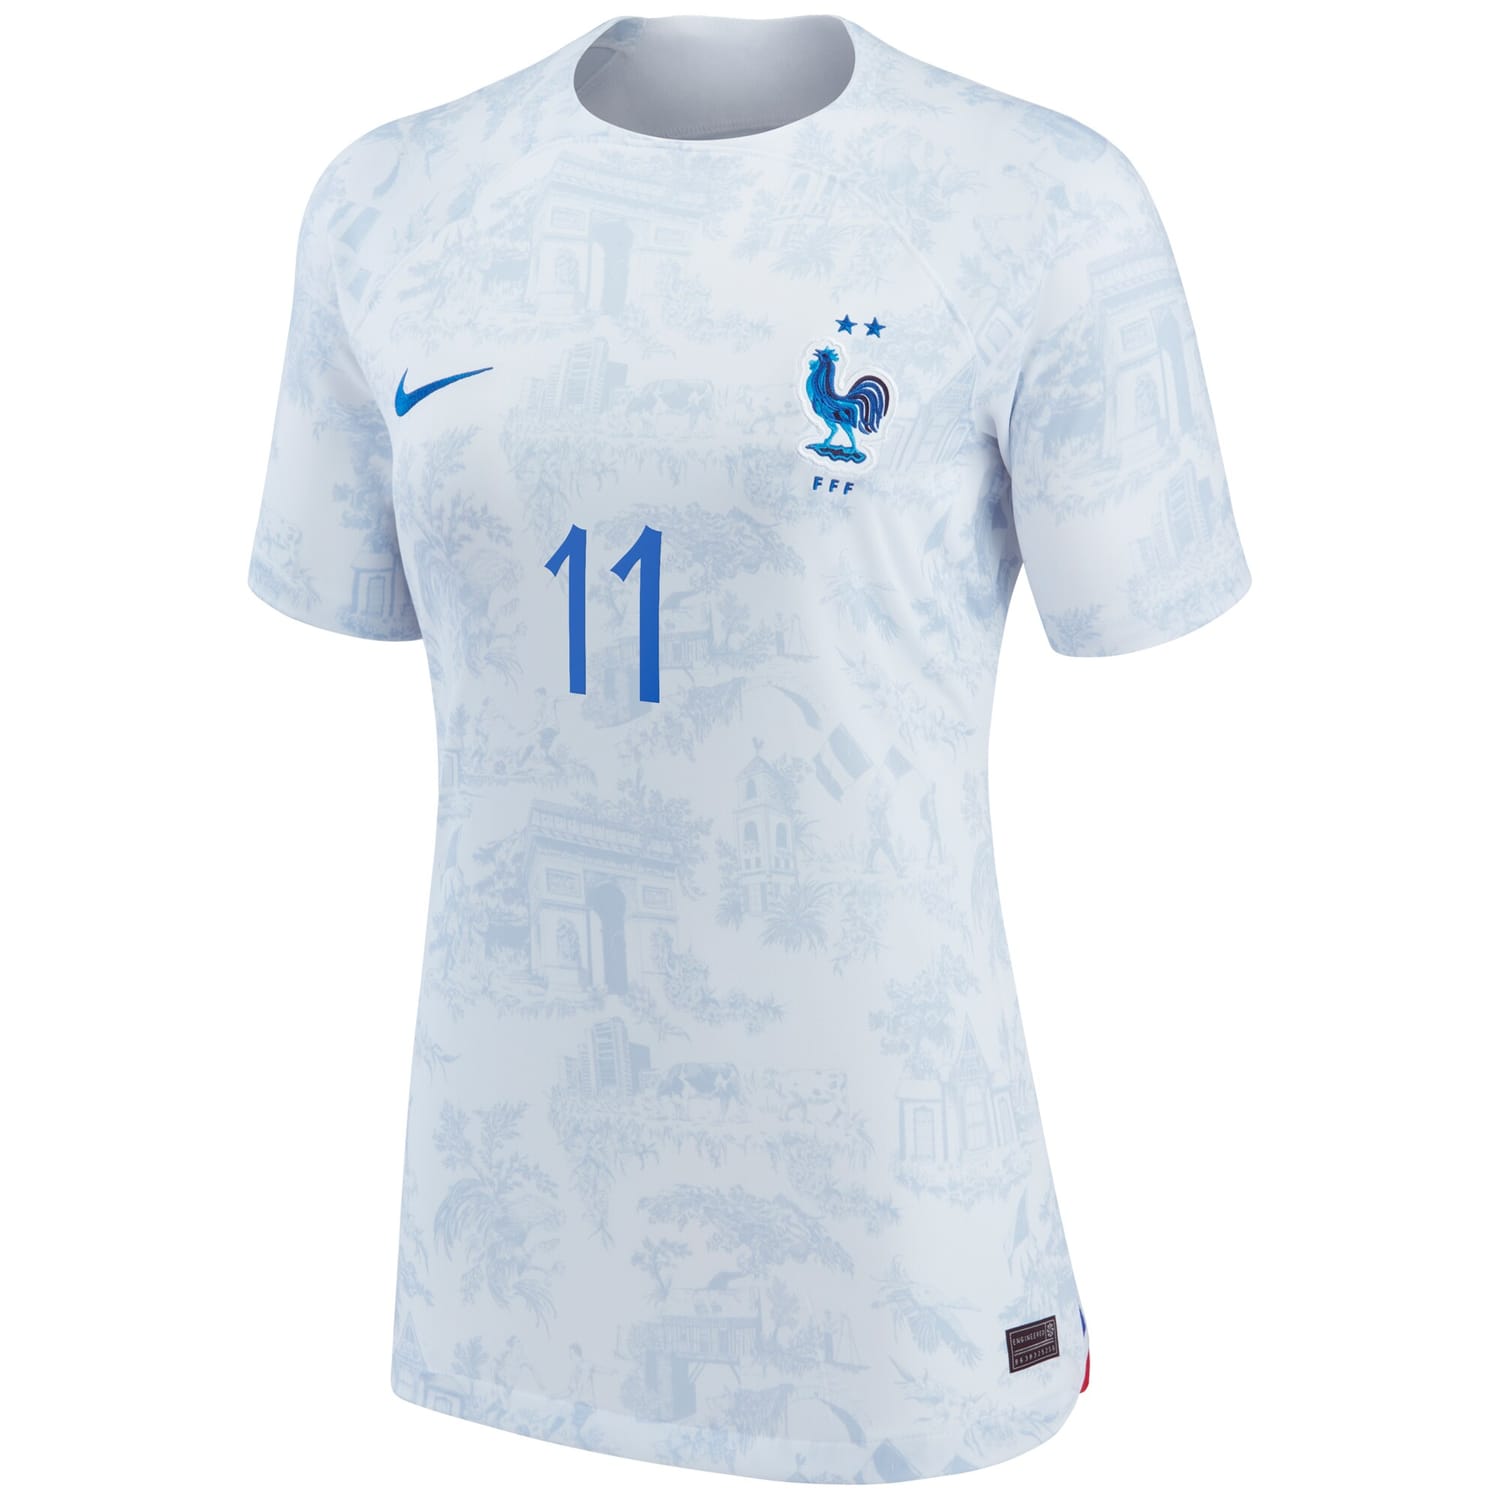 France National Team Away Jersey Shirt White 2022-23 player Ousmane Dembele printing for Women